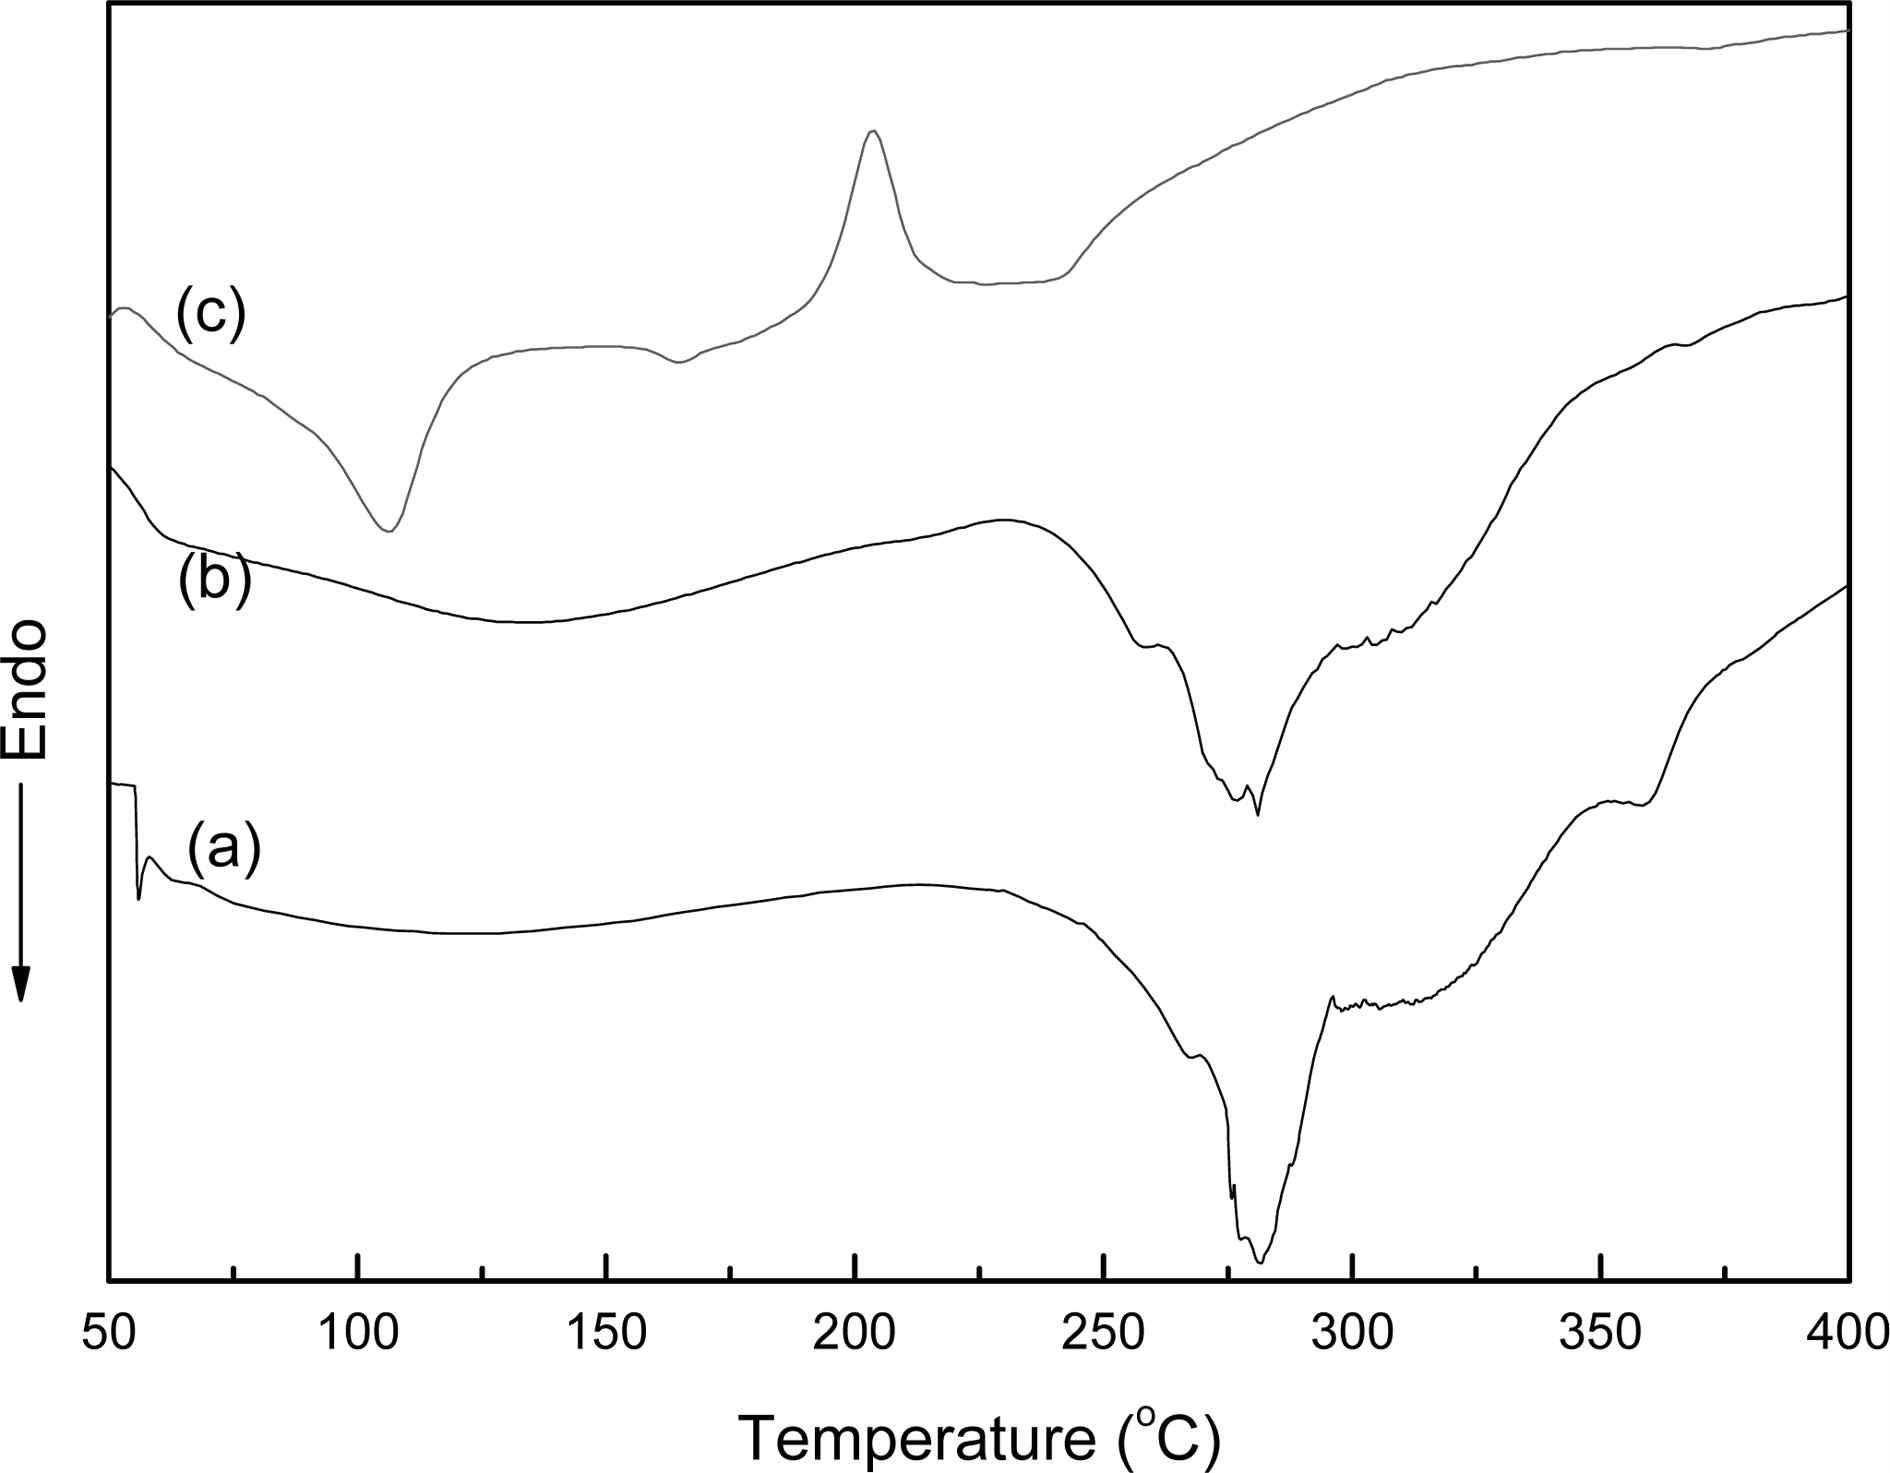 DSC thermograms of (a) SF, (b) tetracycline-incorporated SF, and (c) tetracycline